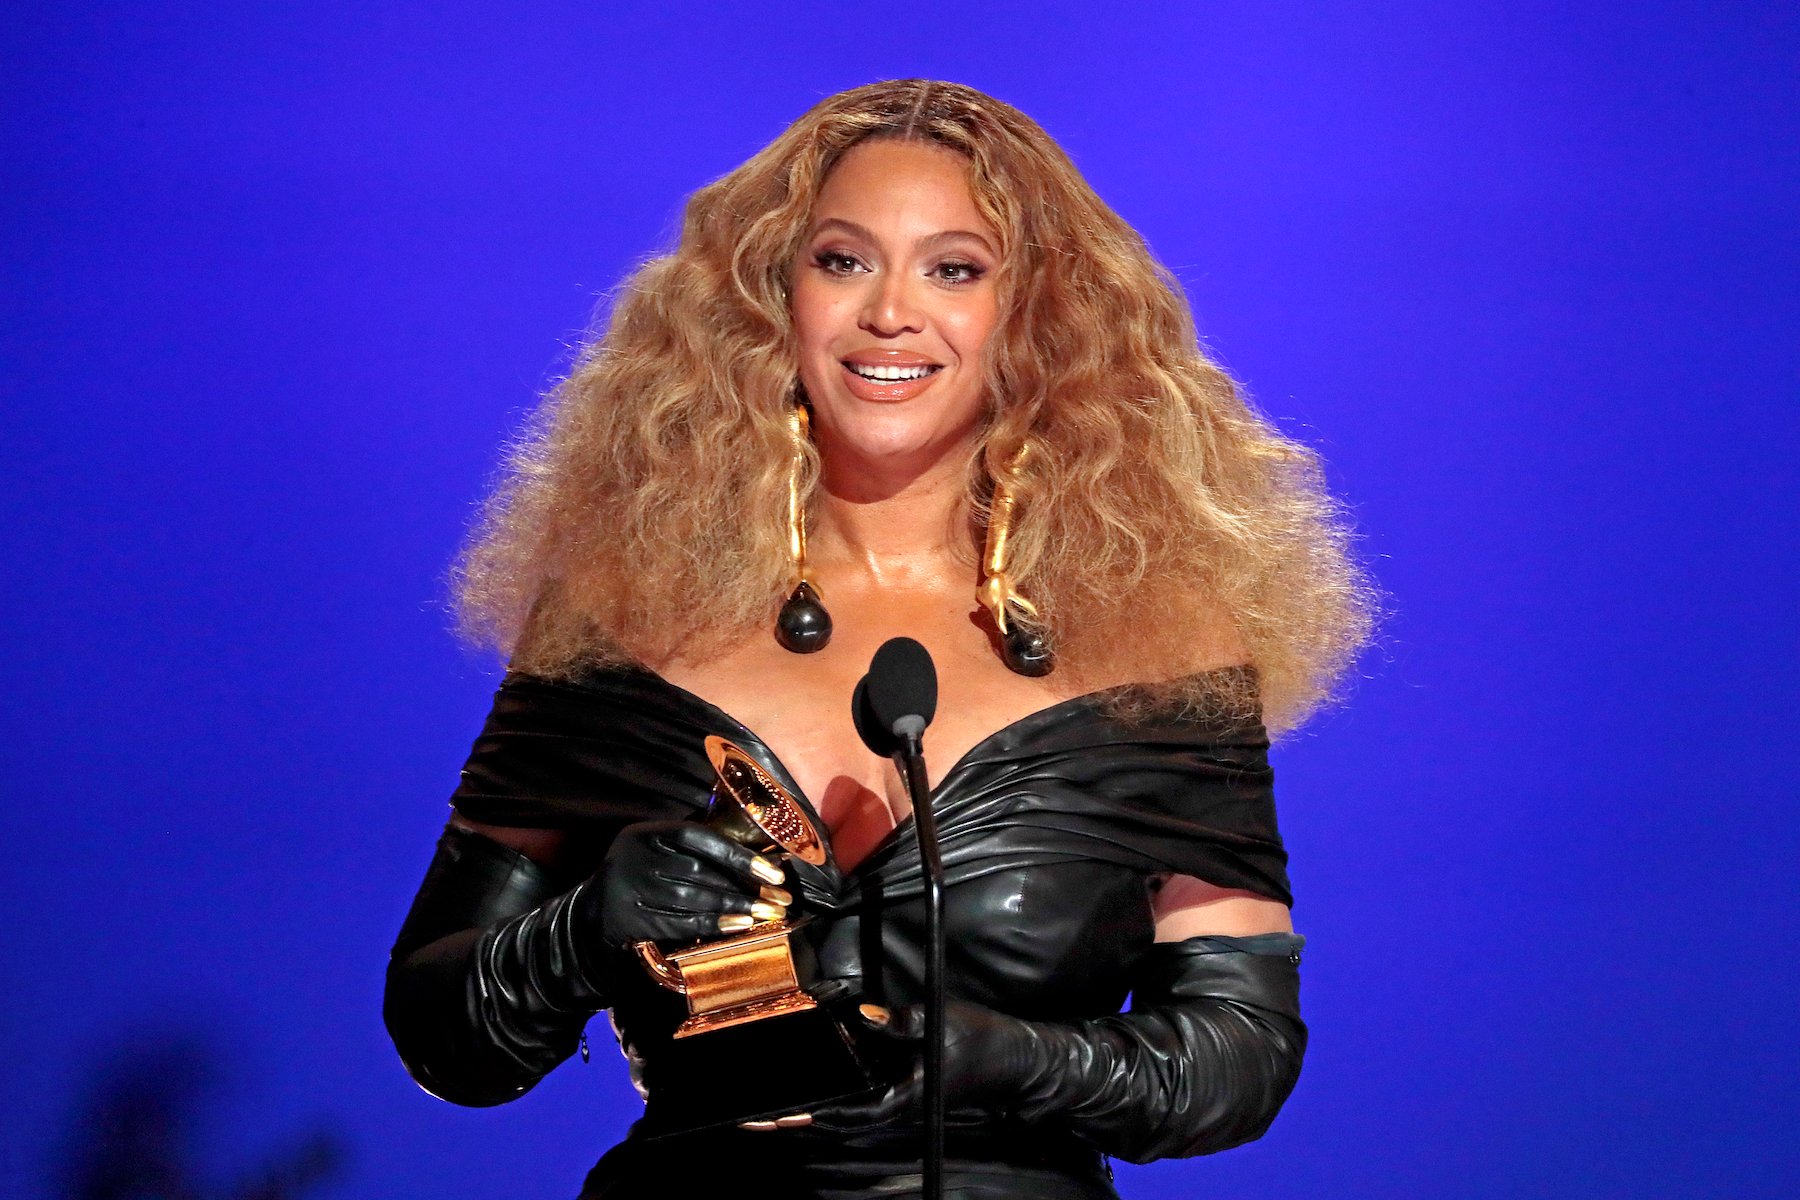 Beyoncé, who is nominated at the AMAs which are open to votes from viewers